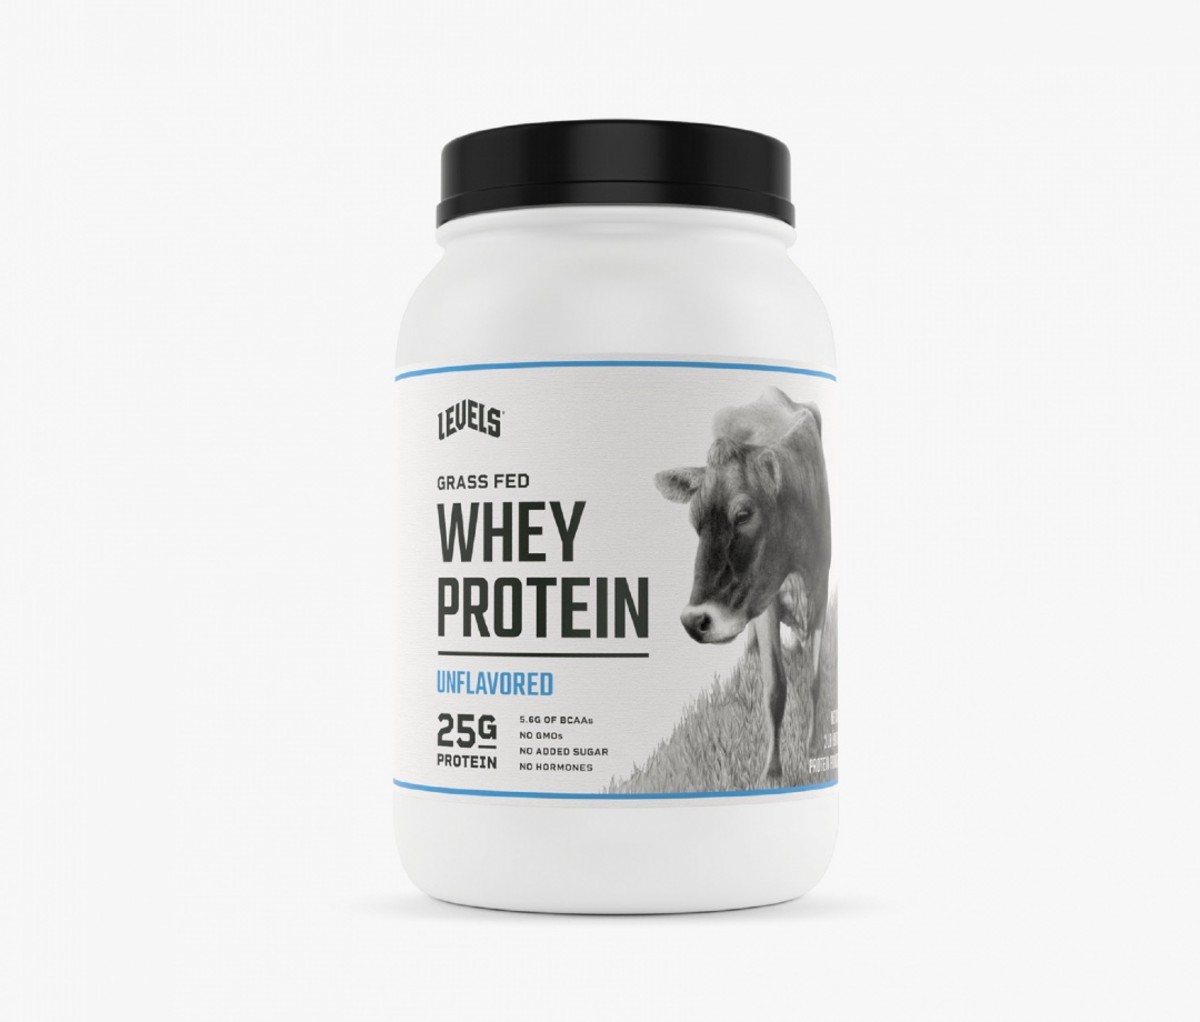 Grass-fed, a clean protein powder with a hormone-free dairy is the only dairy levels uses to make its whey protein.